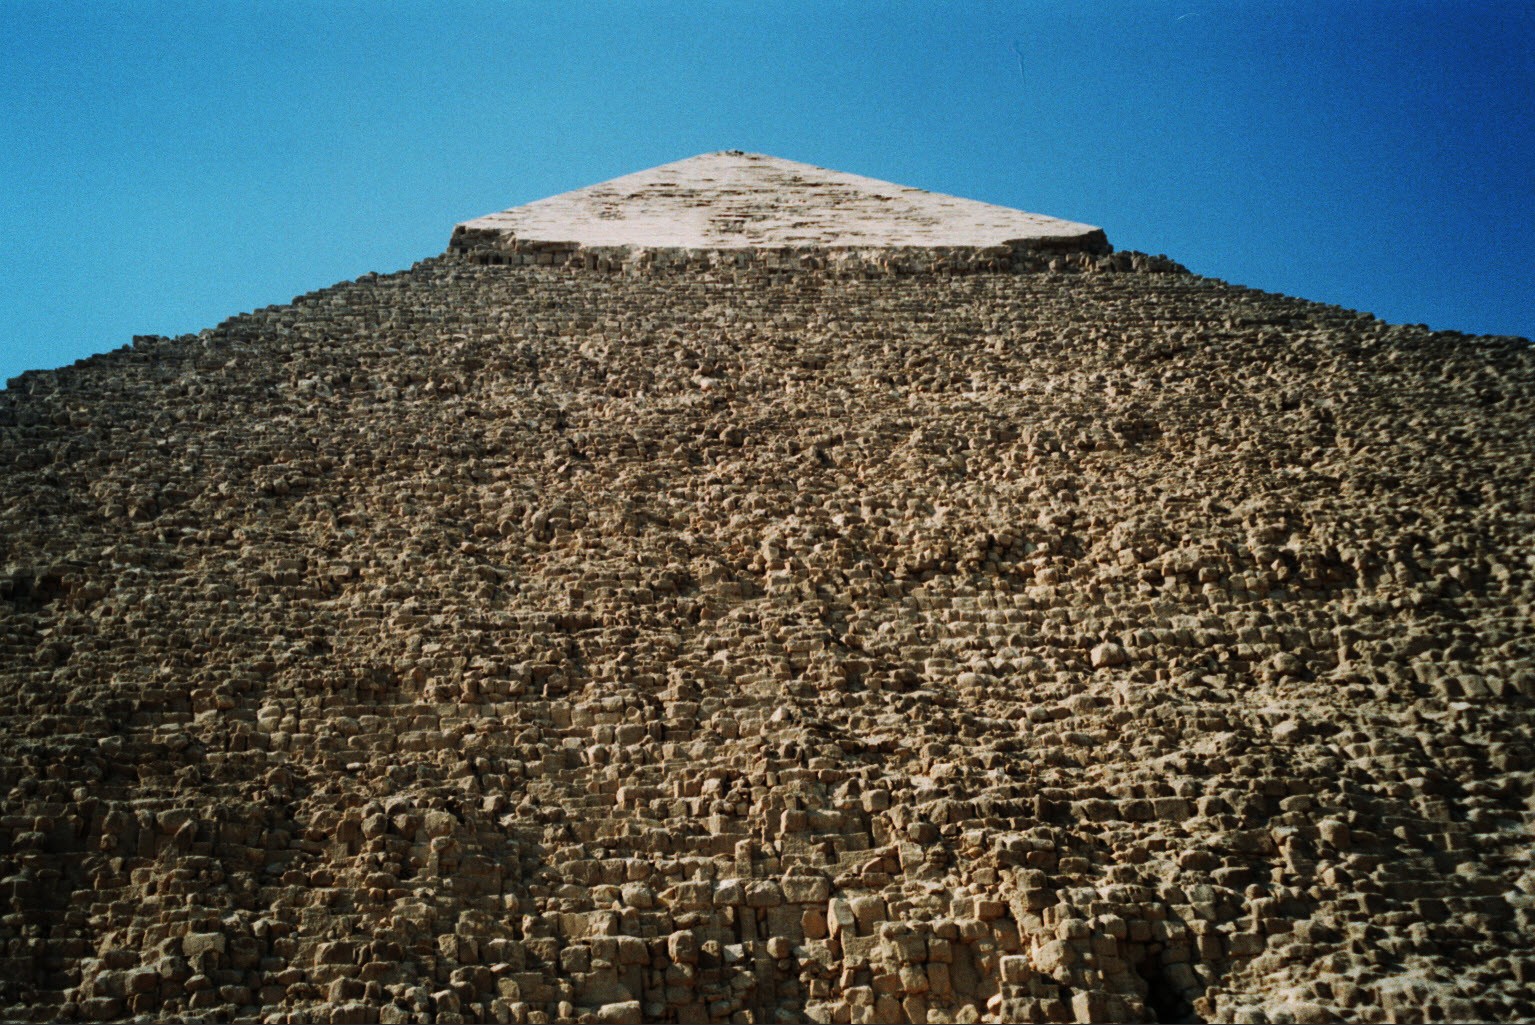 General 1535x1025 Pyramids of Giza Egypt ancient pyramid old building history landmark World Heritage Site Africa